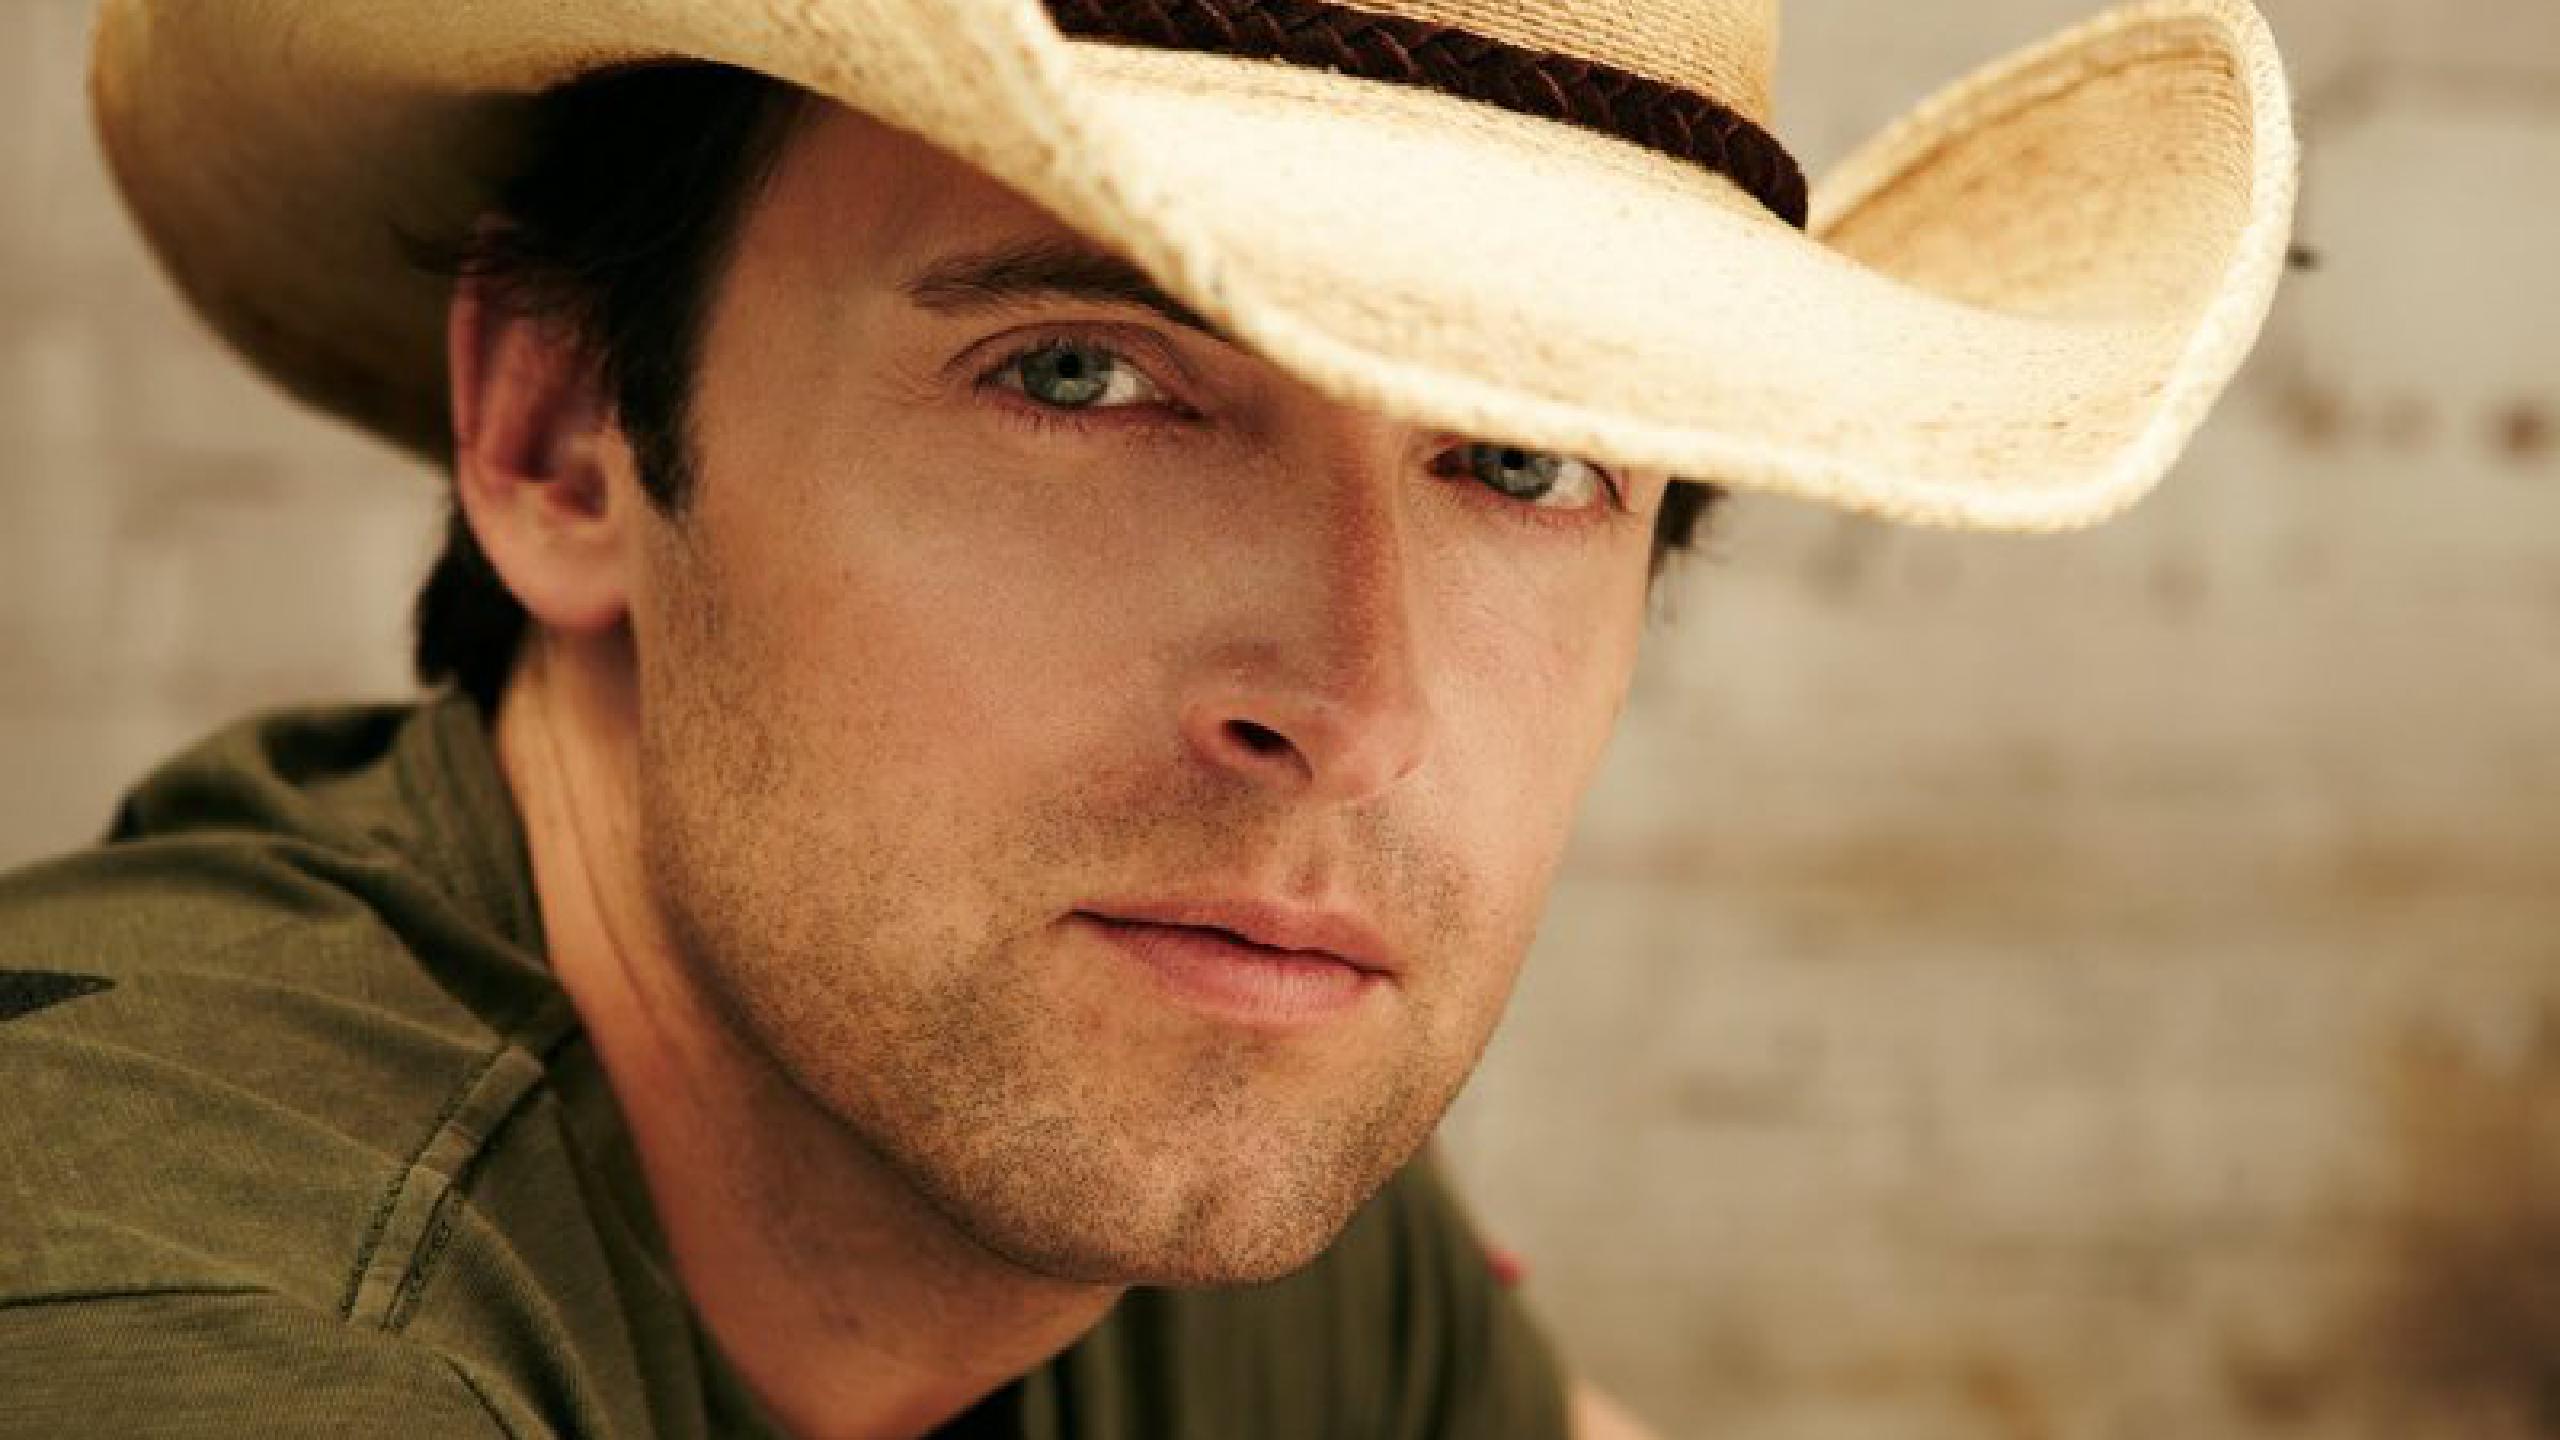 Dean Brody tour dates 2023 2024. Dean Brody tickets and concerts Wegow